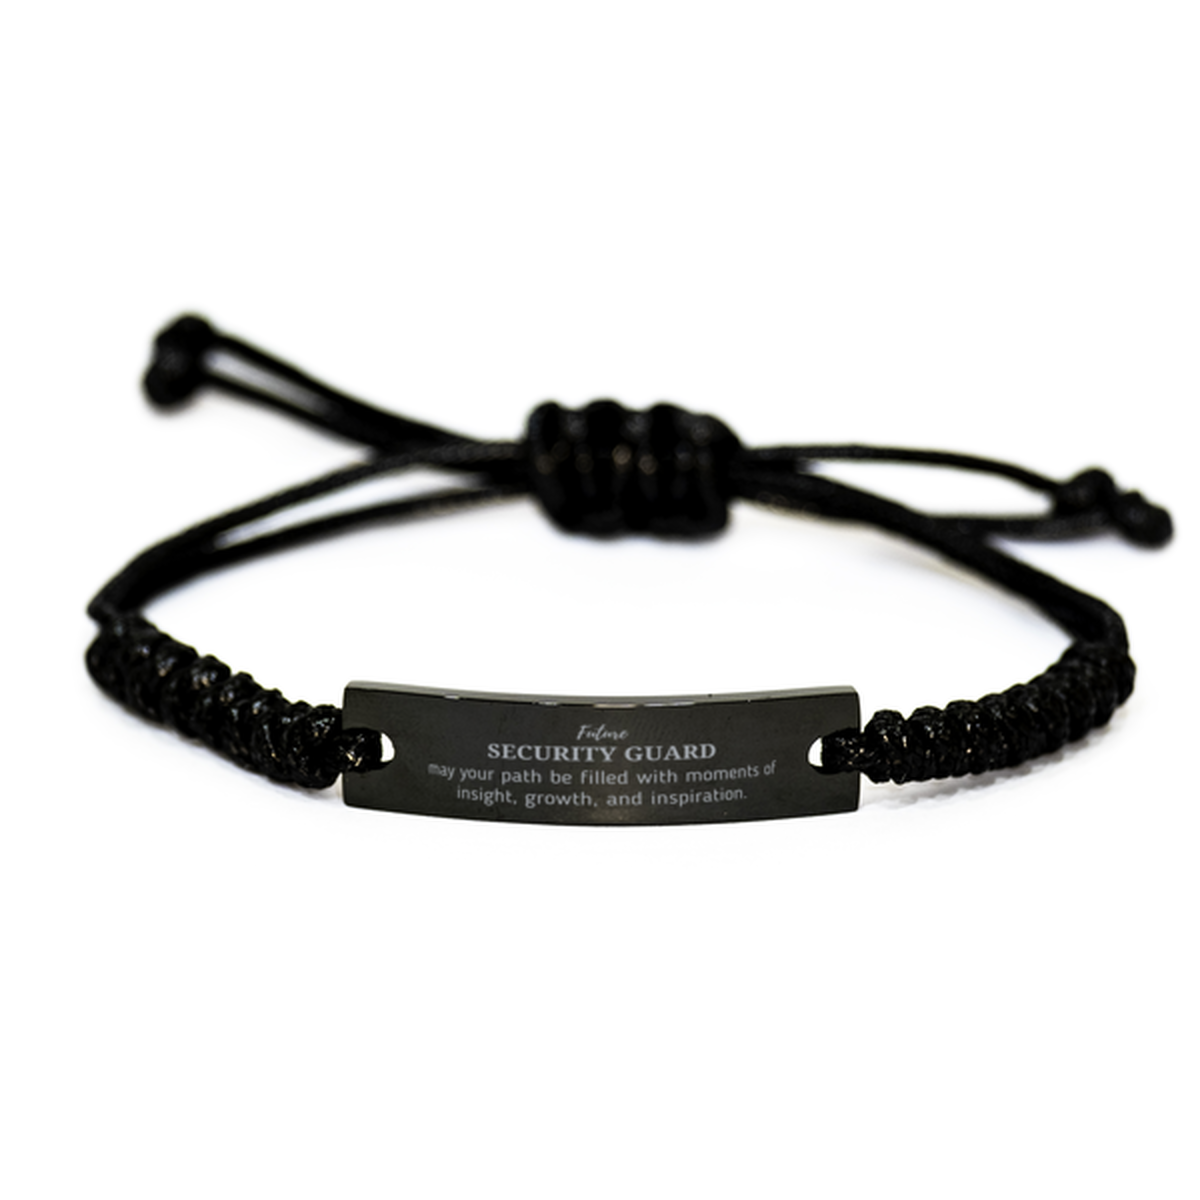 Future Security Guard Gifts, May your path be filled with moments of insight, Graduation Gifts for New Security Guard, Christmas Unique Black Rope Bracelet For Men, Women, Friends